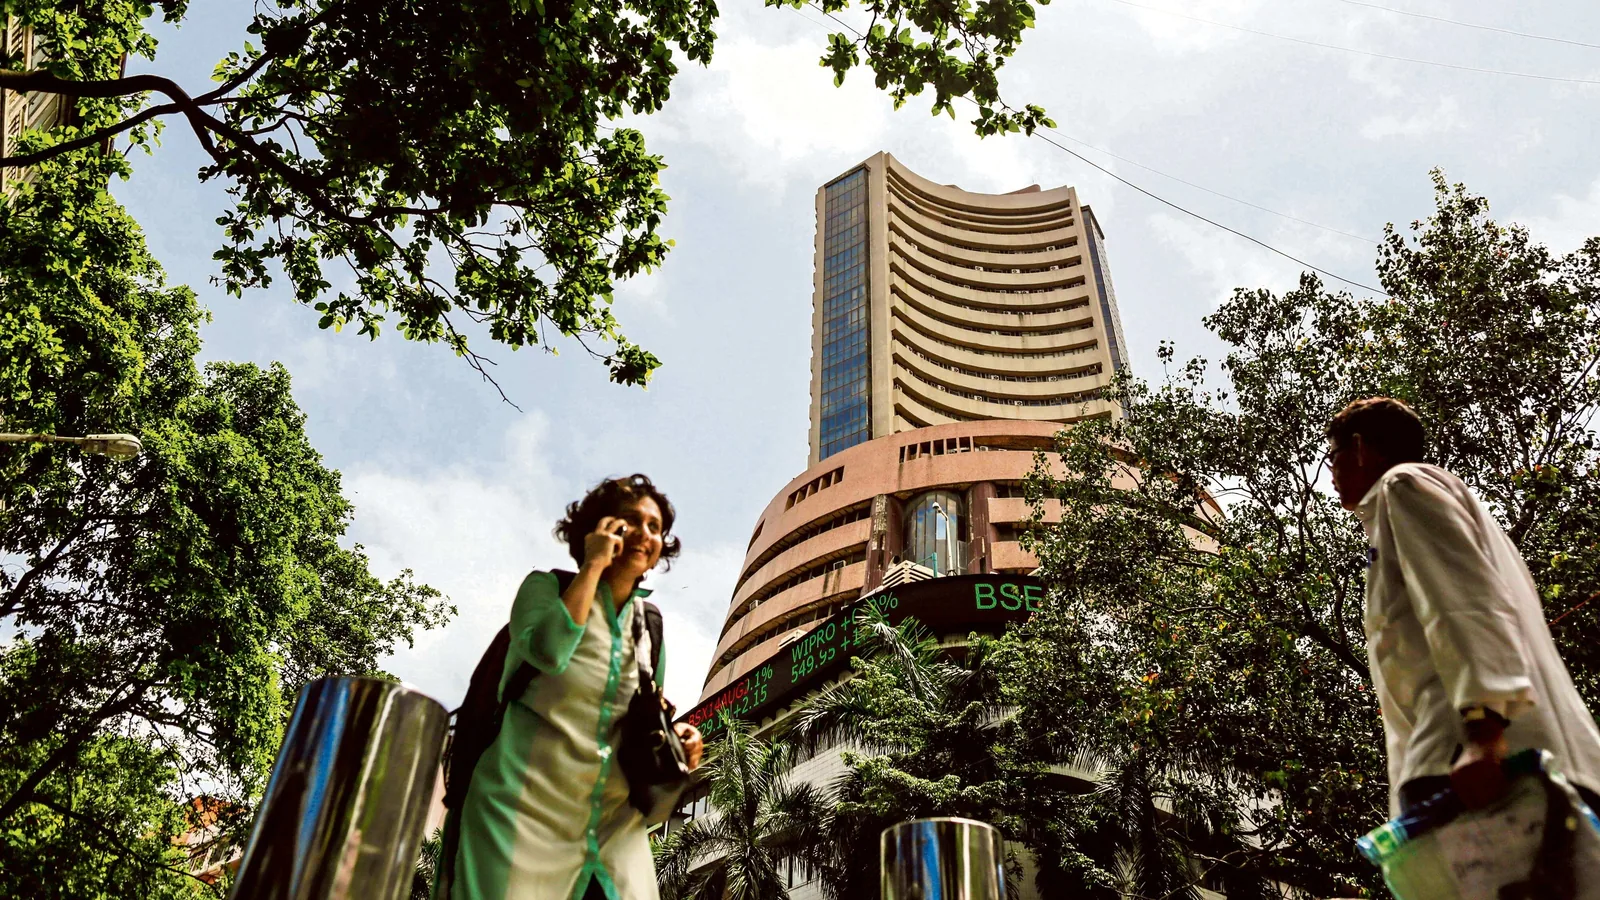 Market Bell: Sensex opens 187 pts higher at 57,757; Nifty above 17,200-mark